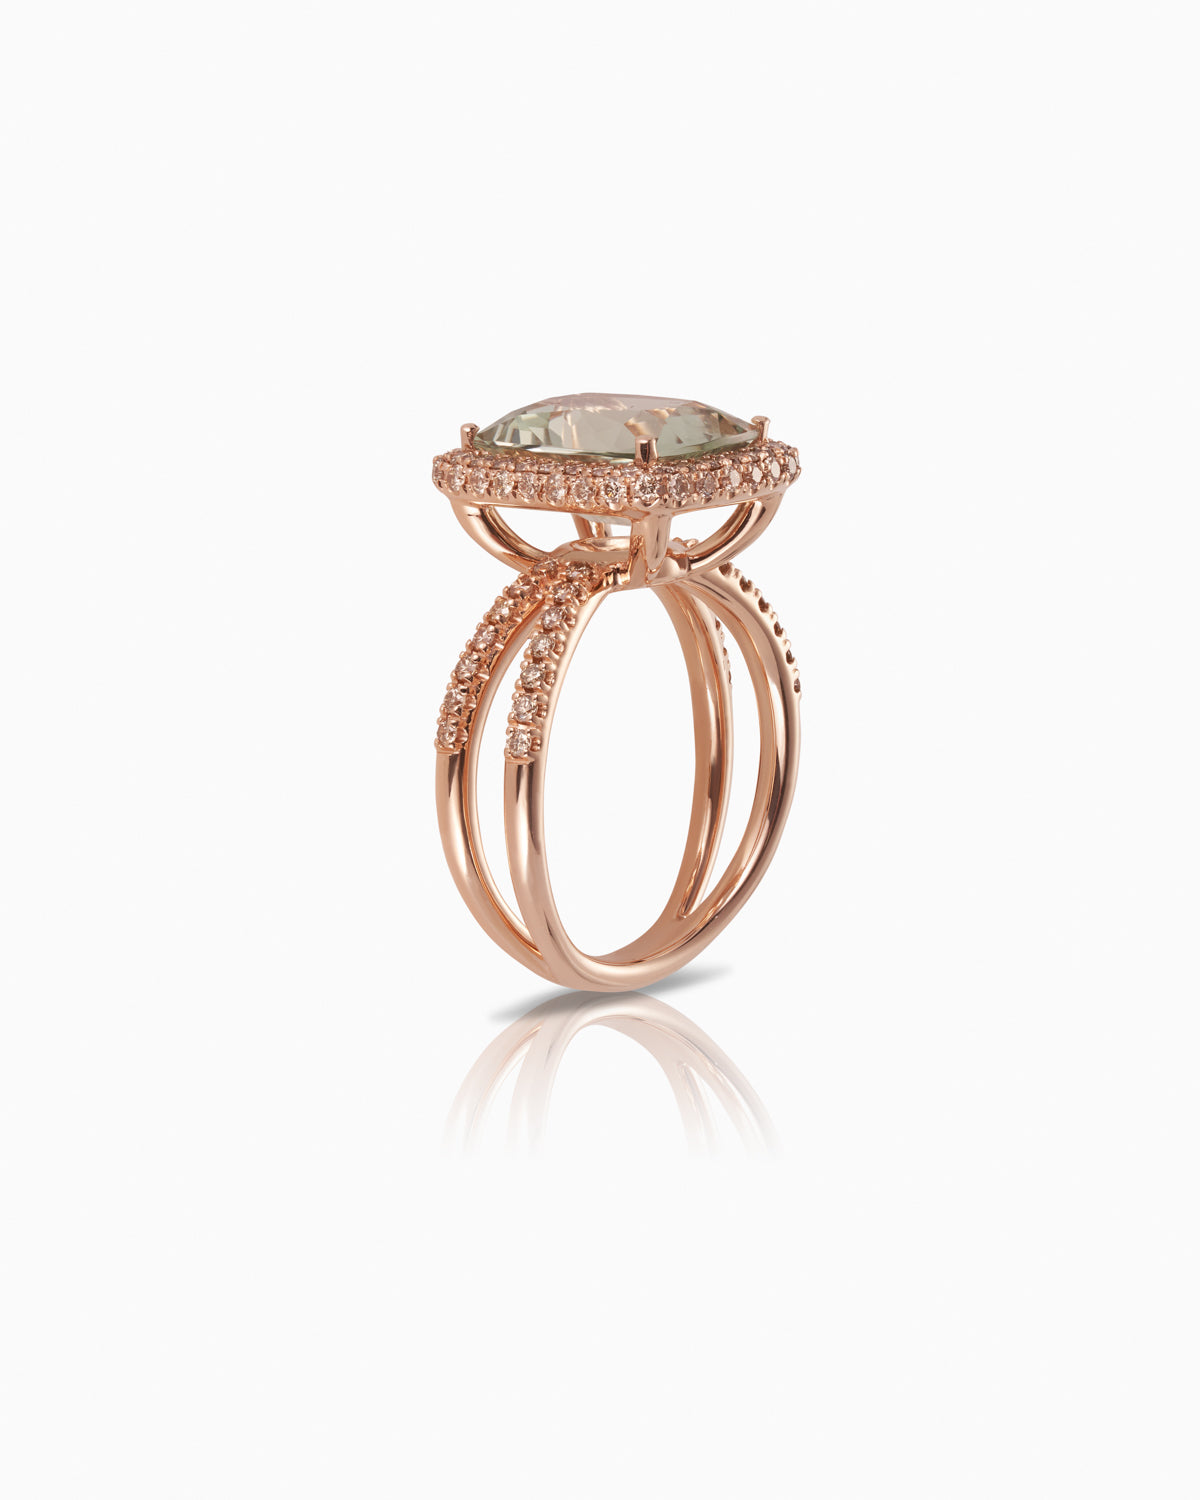 18 karat rose gold 4.26ct green quartz ring featuring 0.81ct champagne diamonds and a split band Side view